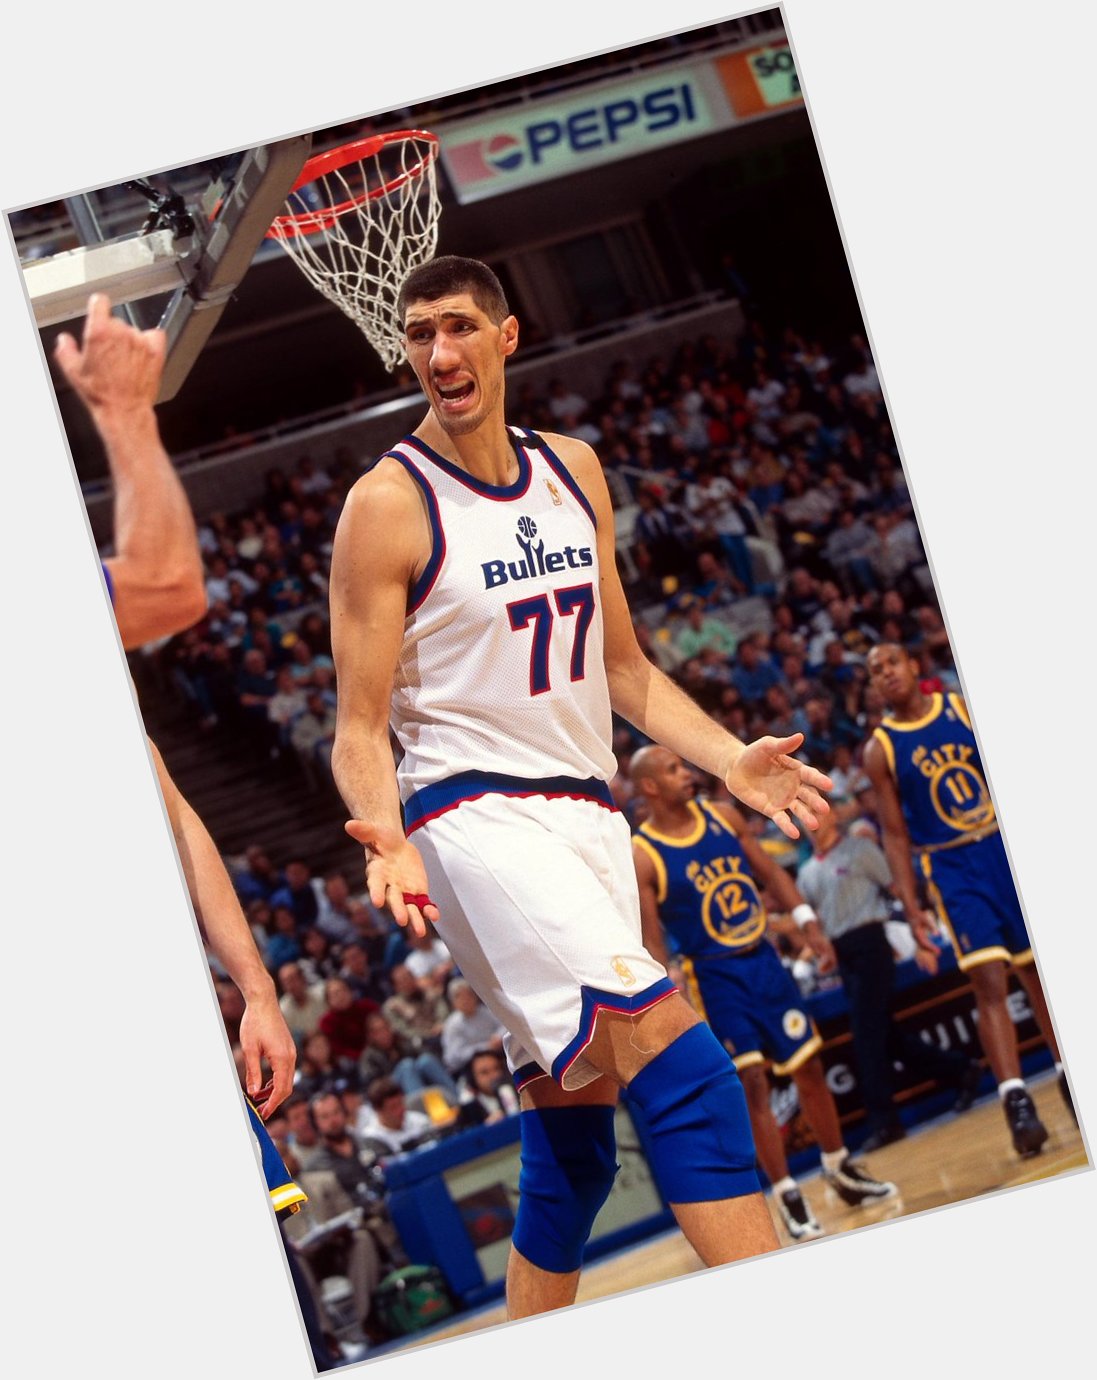 Happy Birthday to Gheorghe Muresan, who turns 44 today! 